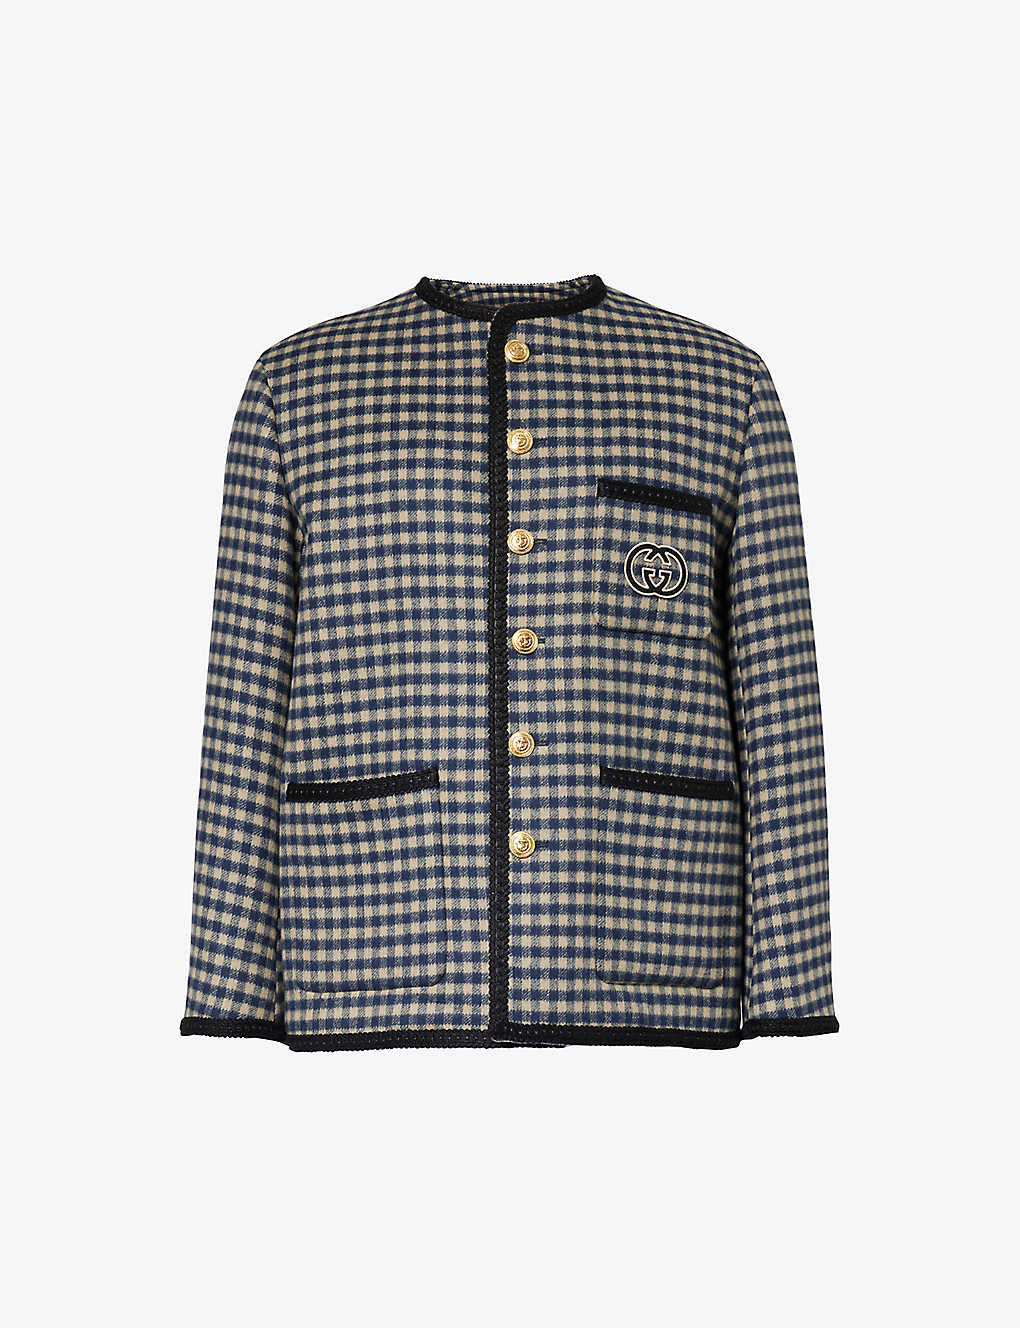 Gucci Brand-embroidered Checked-pattern Wool-blend Jacket In Beige/blue